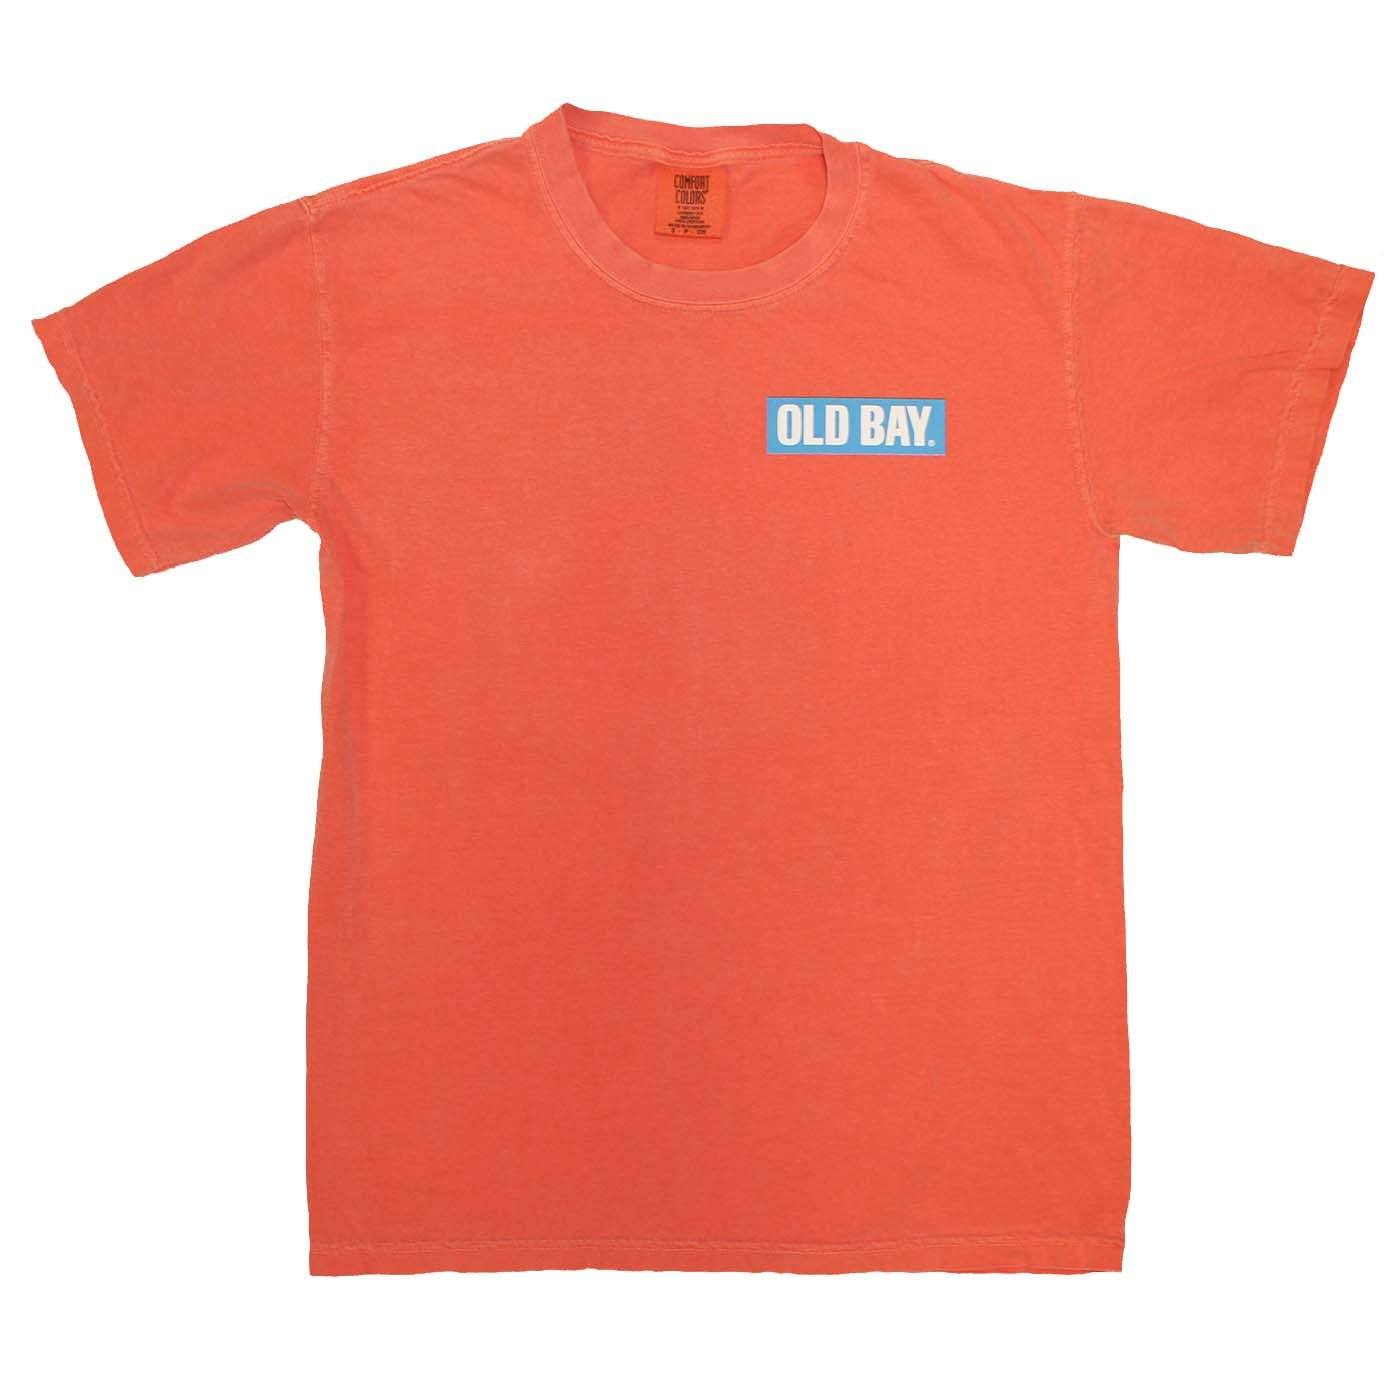 Crabaritaville - Old Bay, USA (Bright Salmon) / Shirt - Route One Apparel